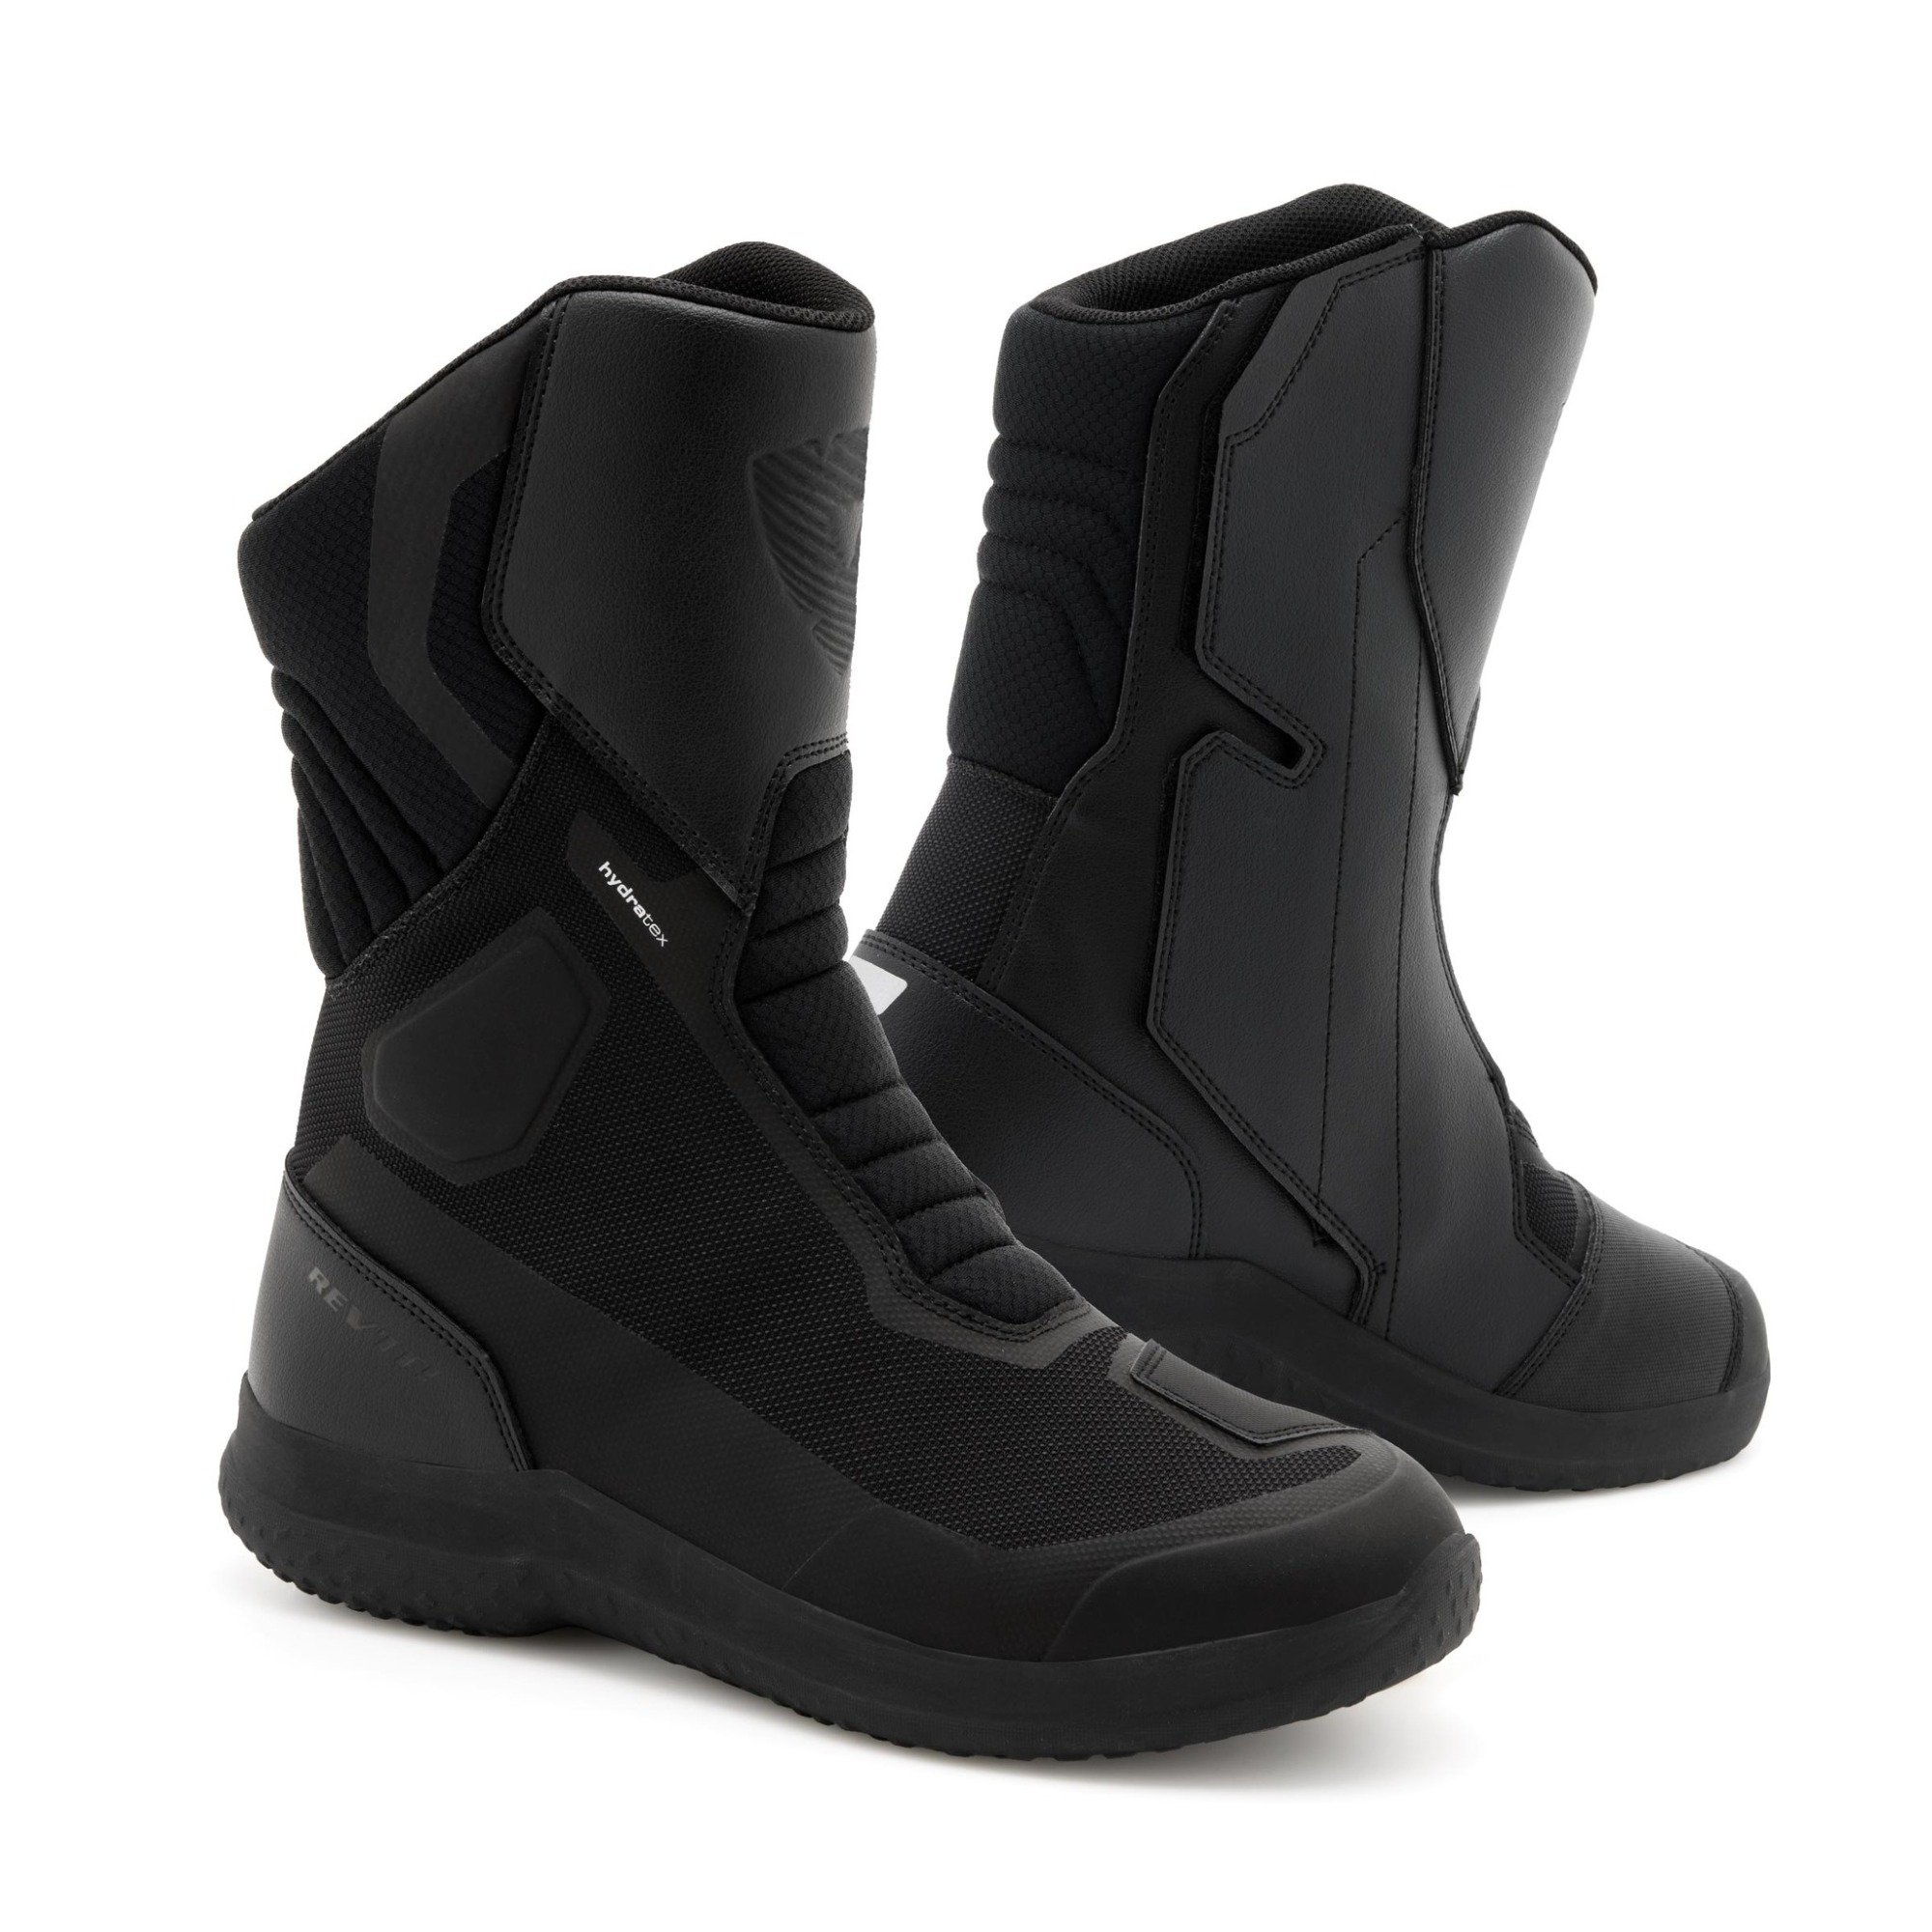 Image of REV'IT! Boots Pulse H2O Black Size 41 ID 8700001330626